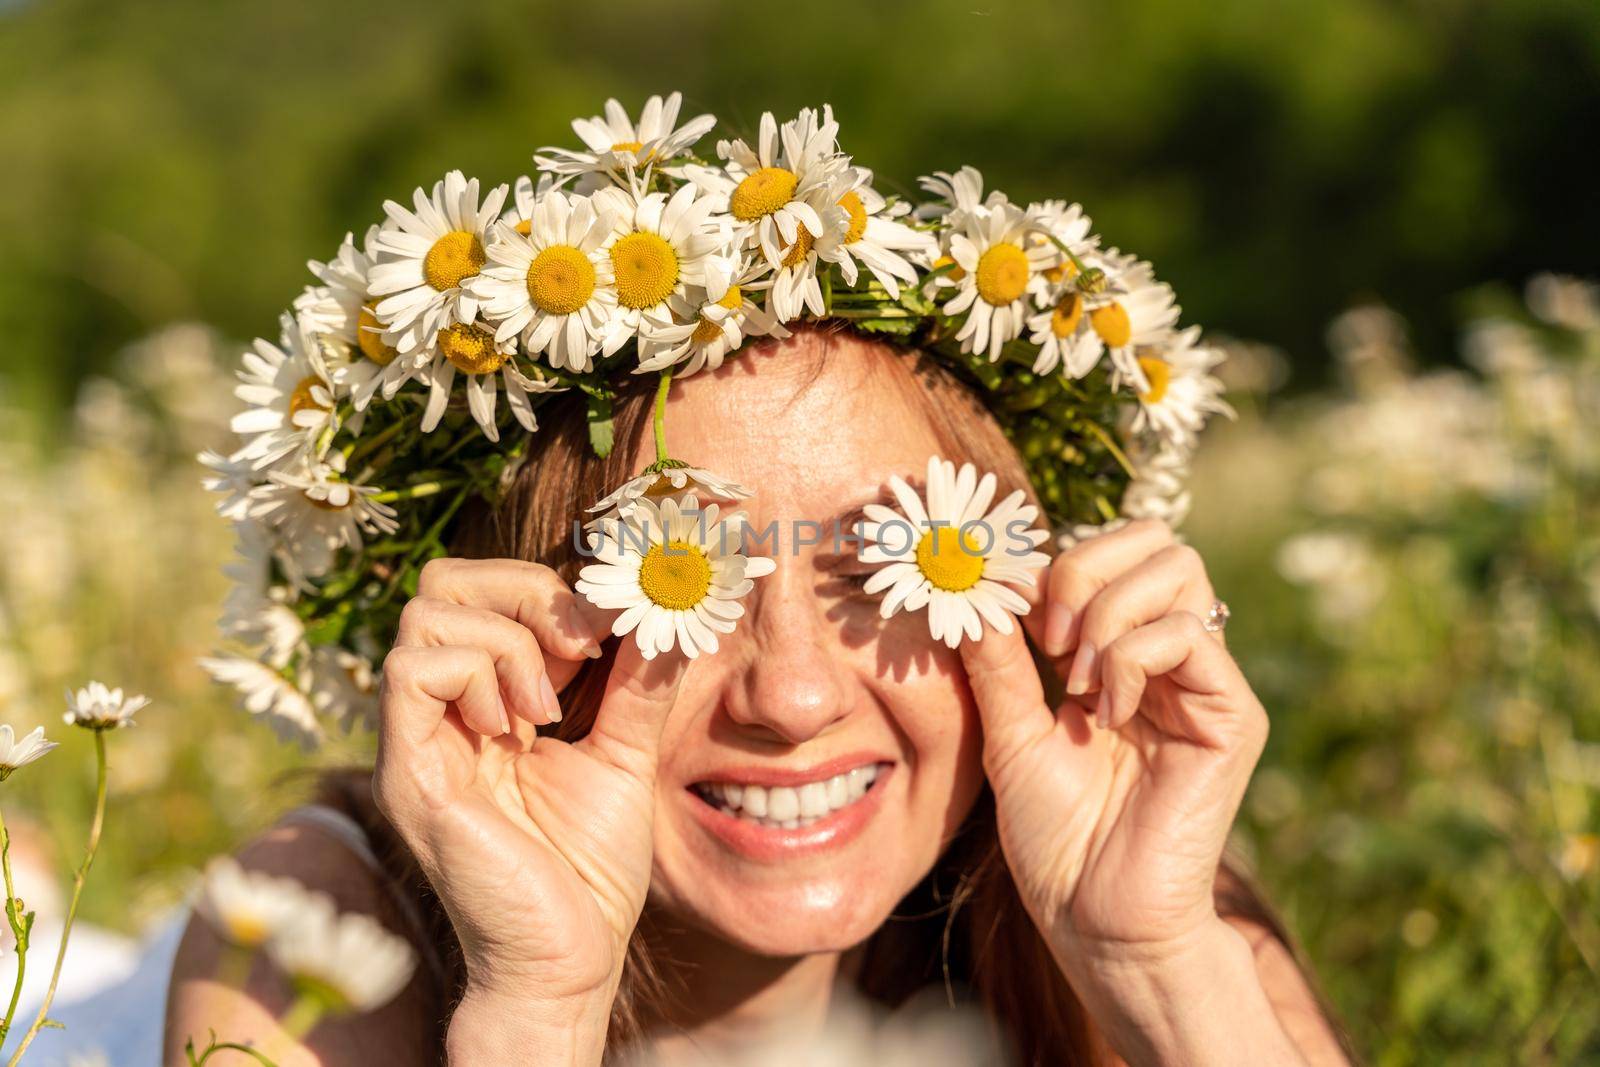 A funny young woman in a wreath of daisies is laughing and holding daisies in front of her eyes. On a large field of daisies against the background of the forest.